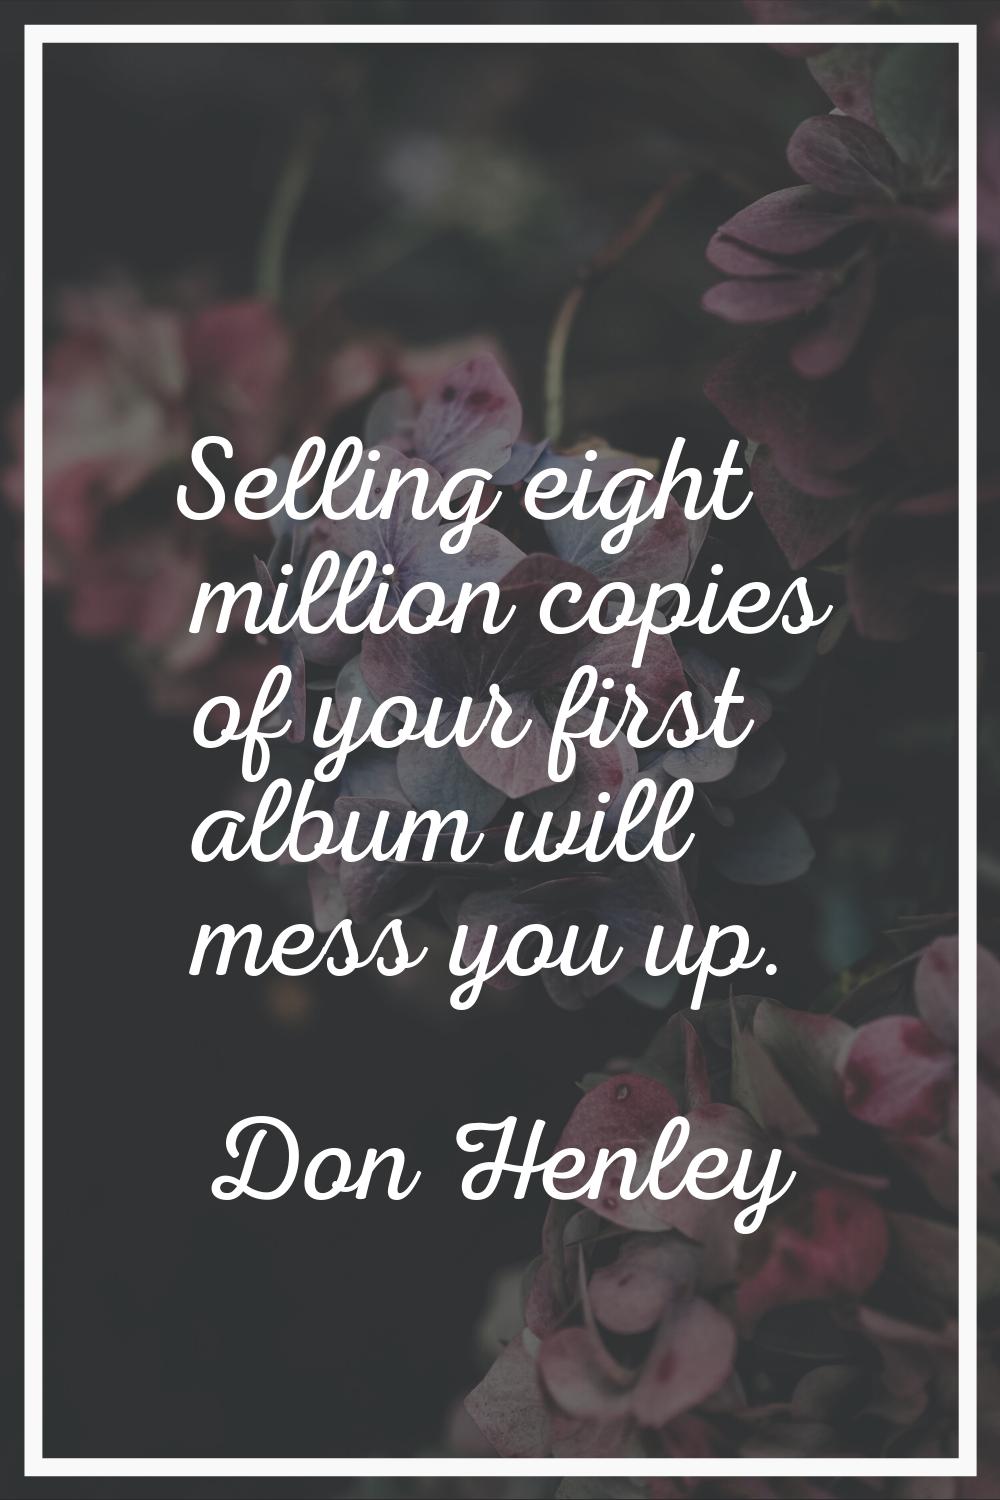 Selling eight million copies of your first album will mess you up.